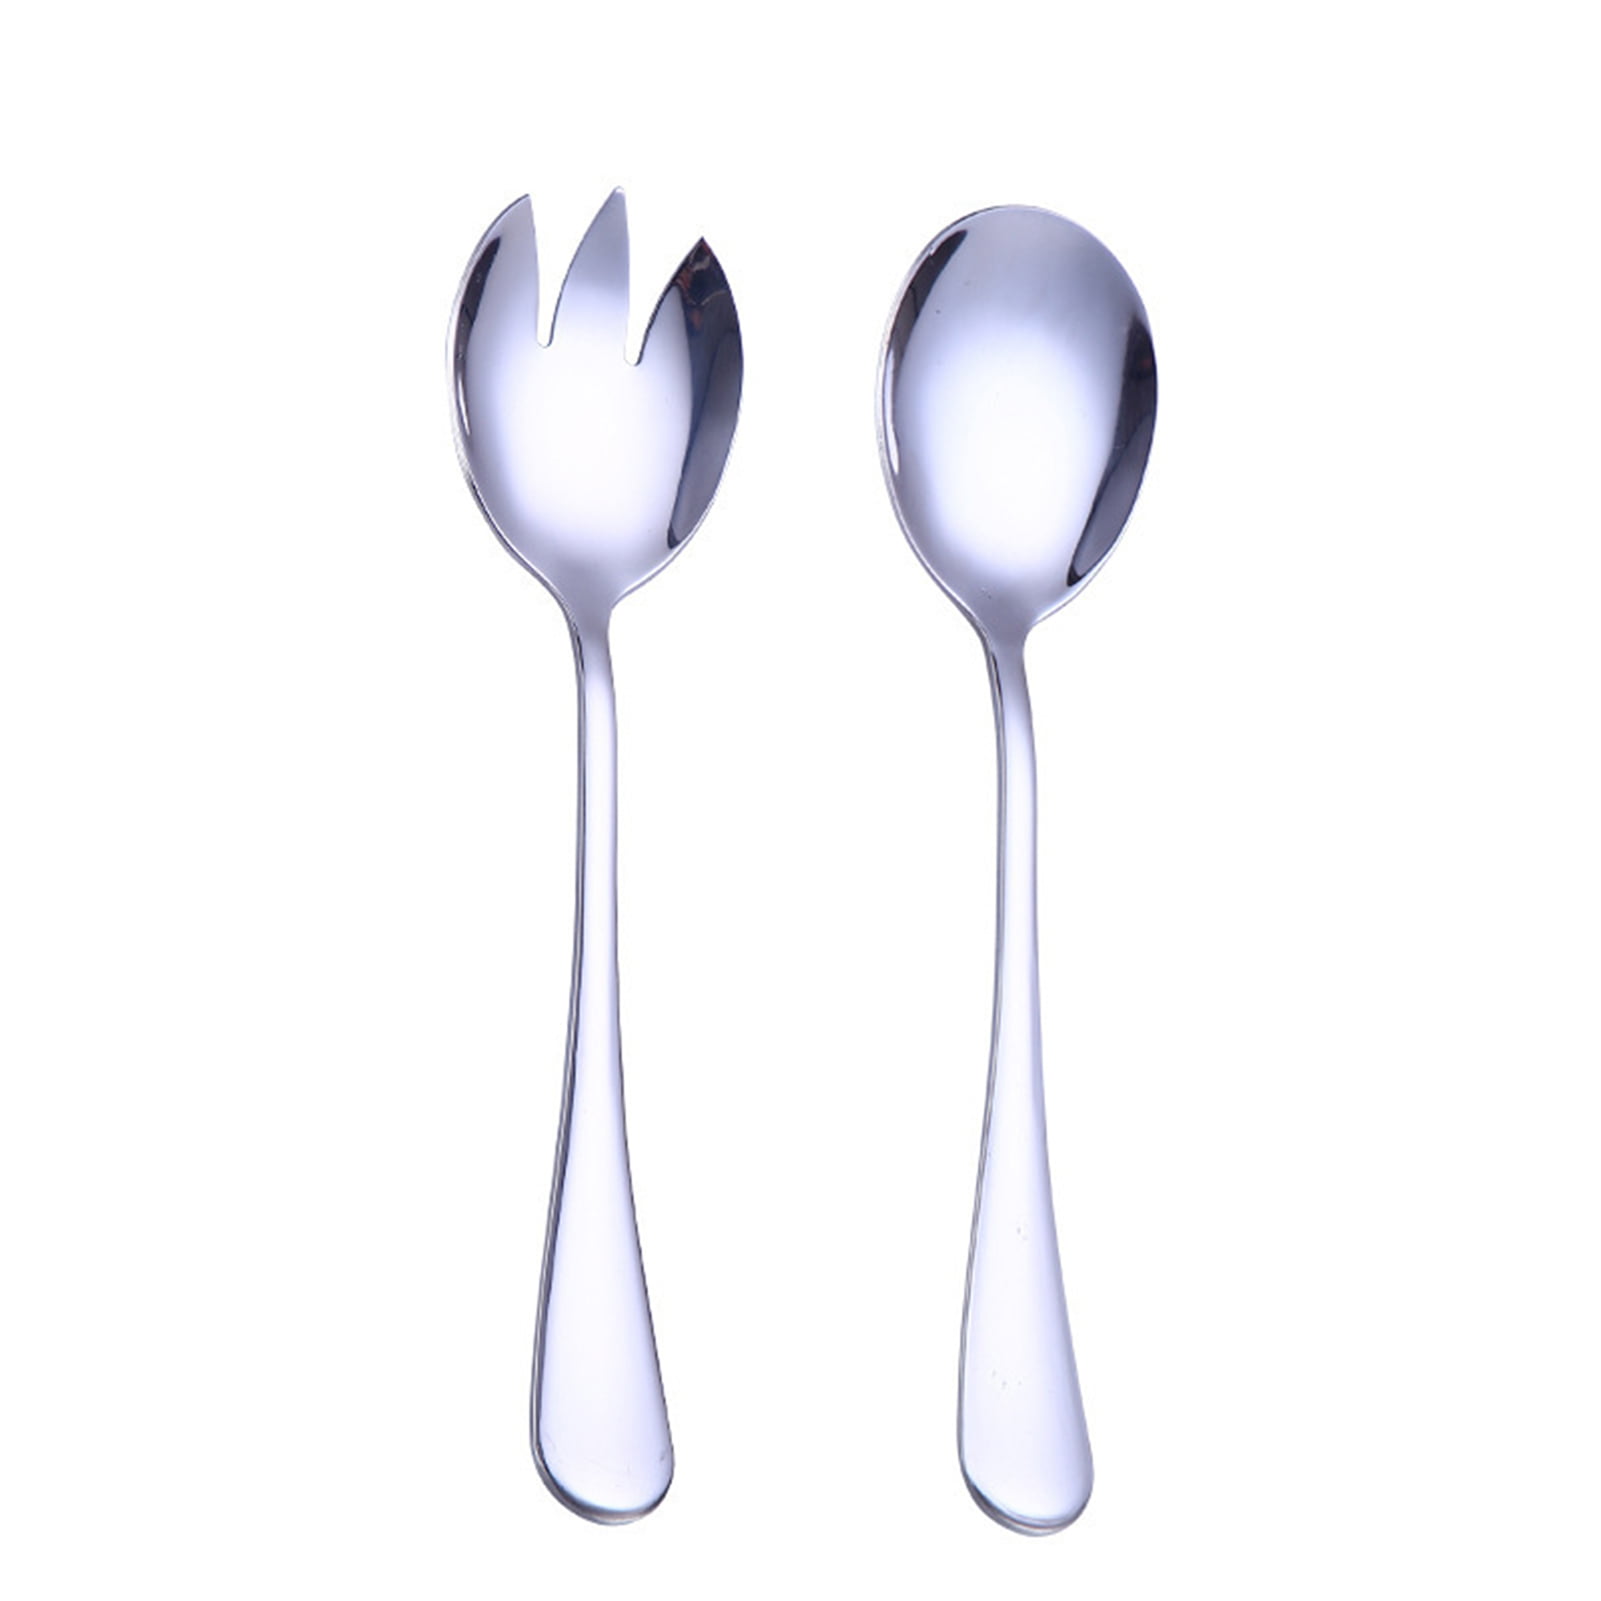 Details about   2 In 1 Spoon Fork Mulit-color New Kitchen Supplier Modern Noodle Cutlery BT 